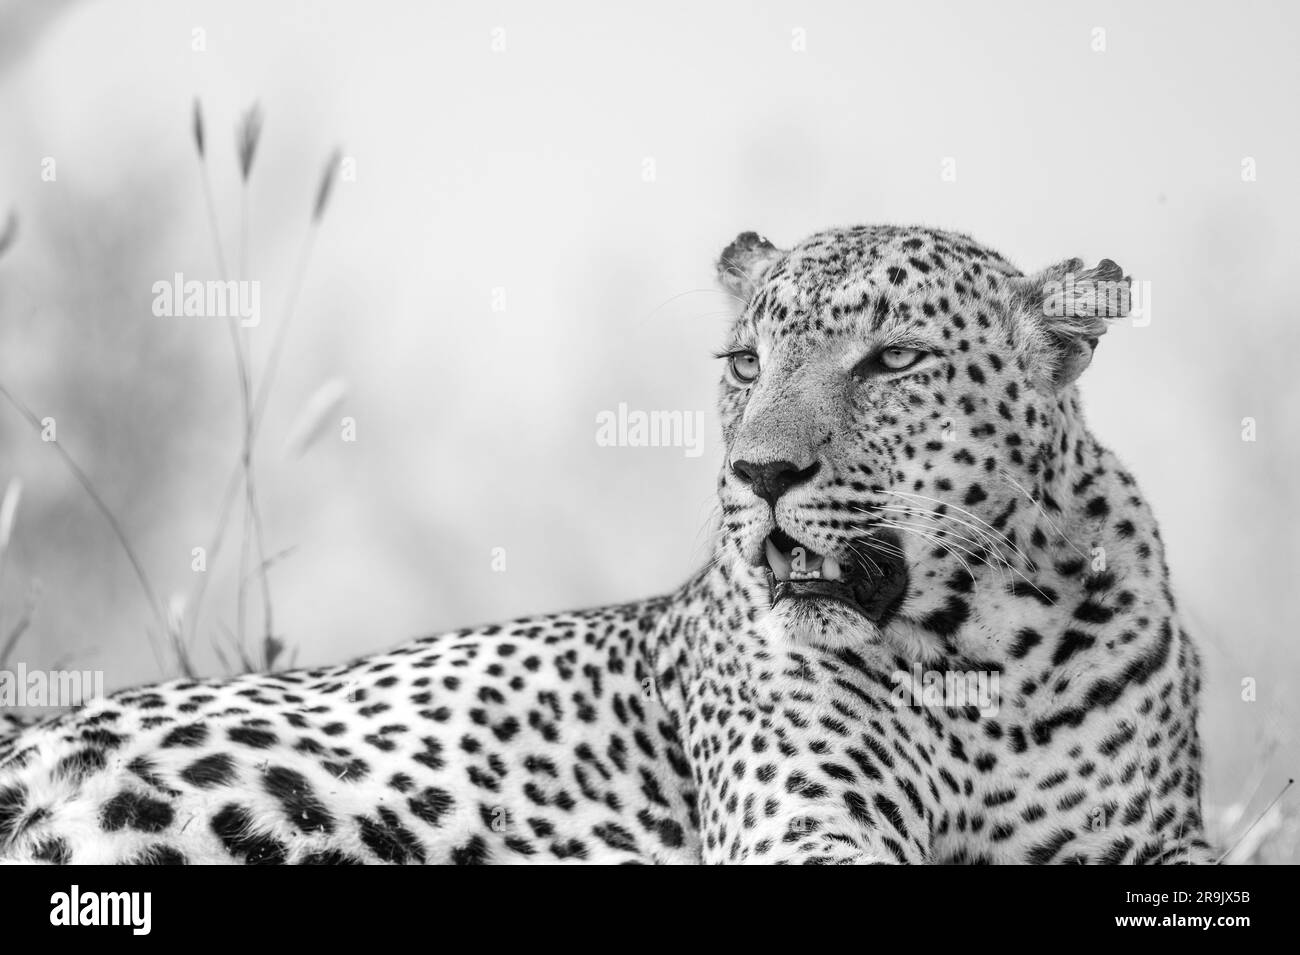 A close-up of a leopard, Panthera pardus, looking to the side. Stock Photo